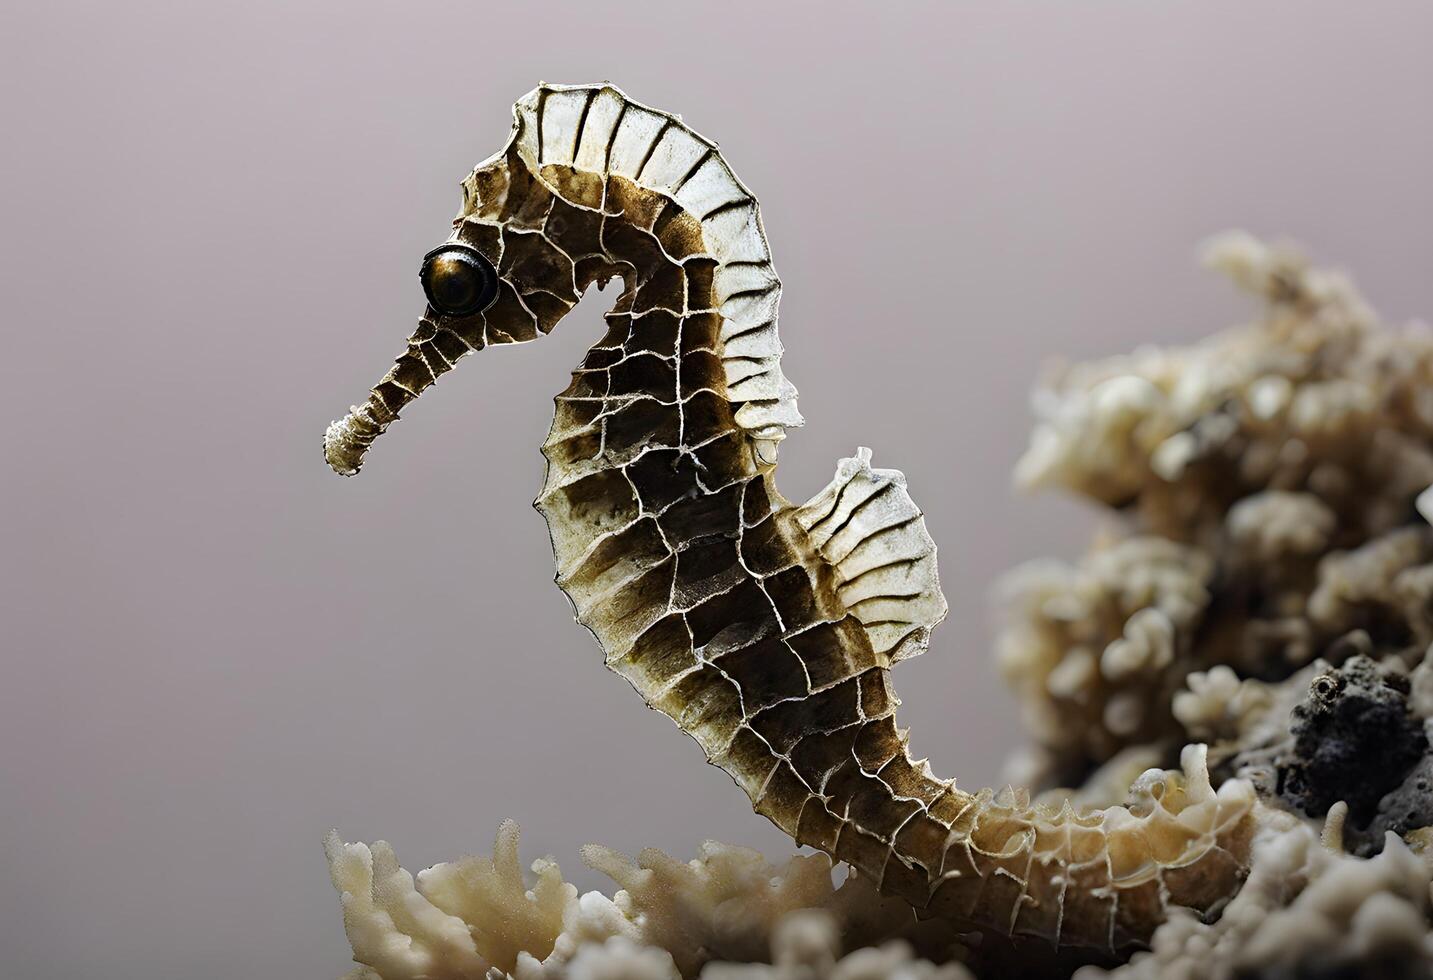 A view of a Seahorse photo